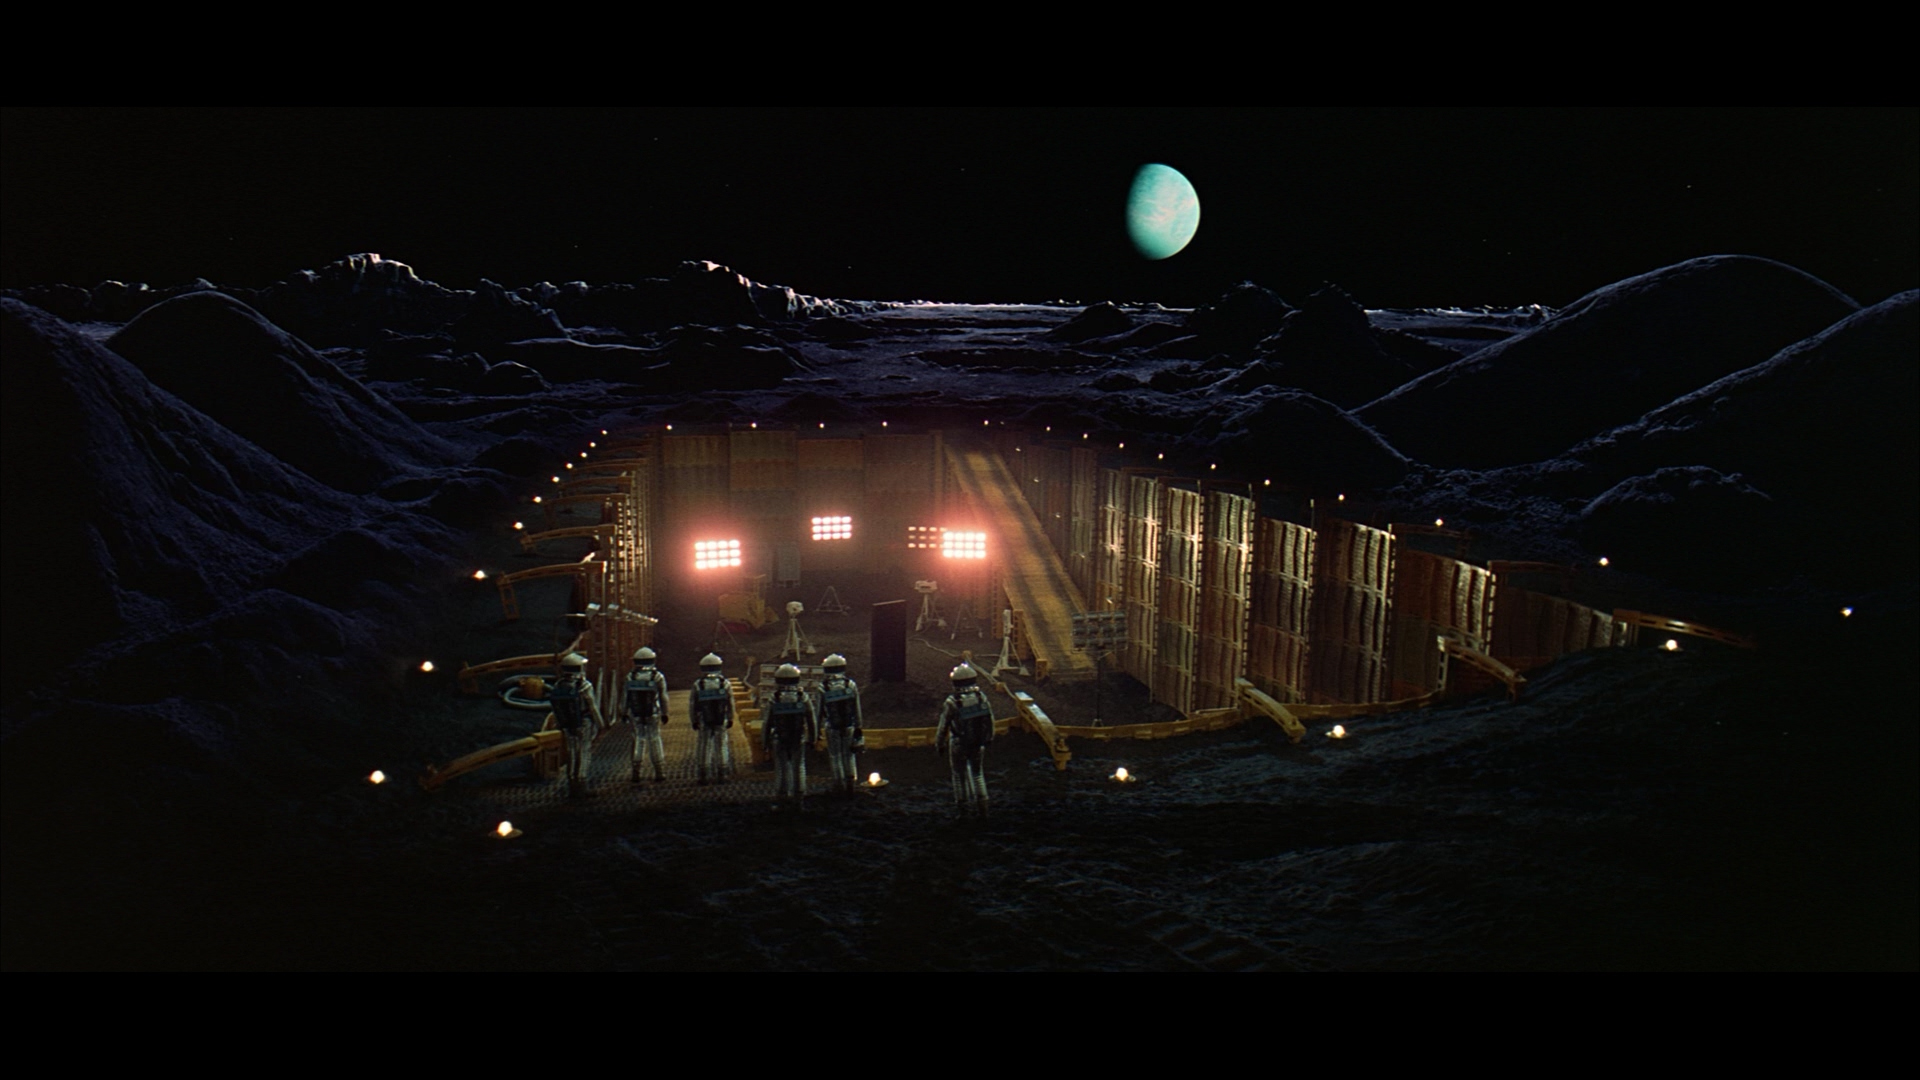 2001: A Space Odyssey Wallpapers